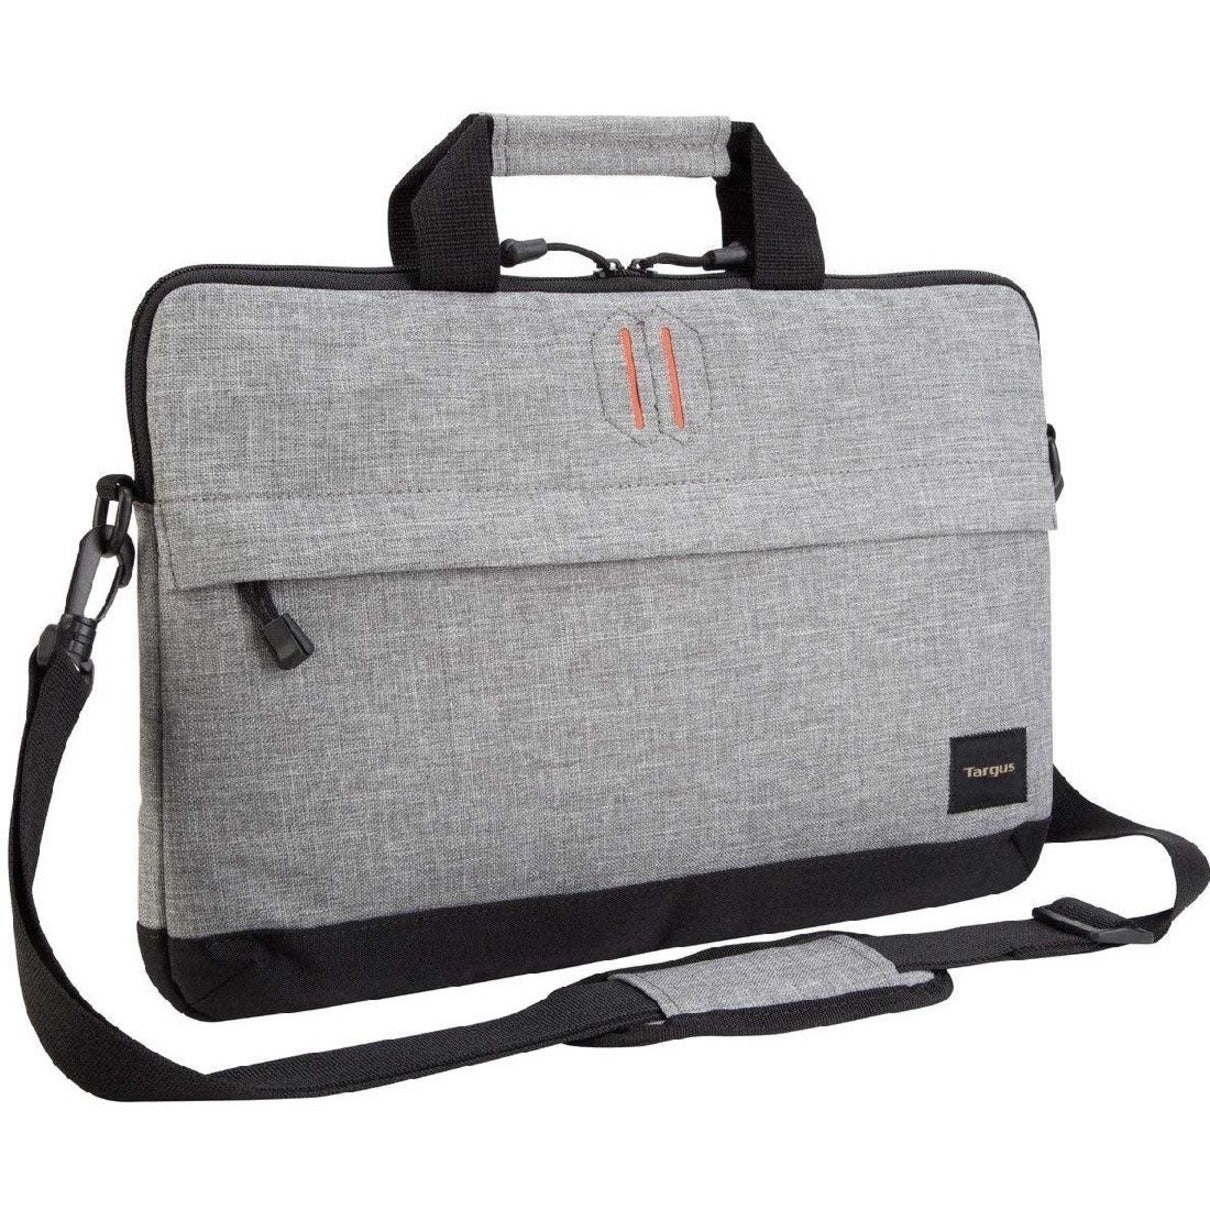 Targus Strata TSS63204US Carrying Case (Sleeve) for 15.6" Notebook - Pewter Gray